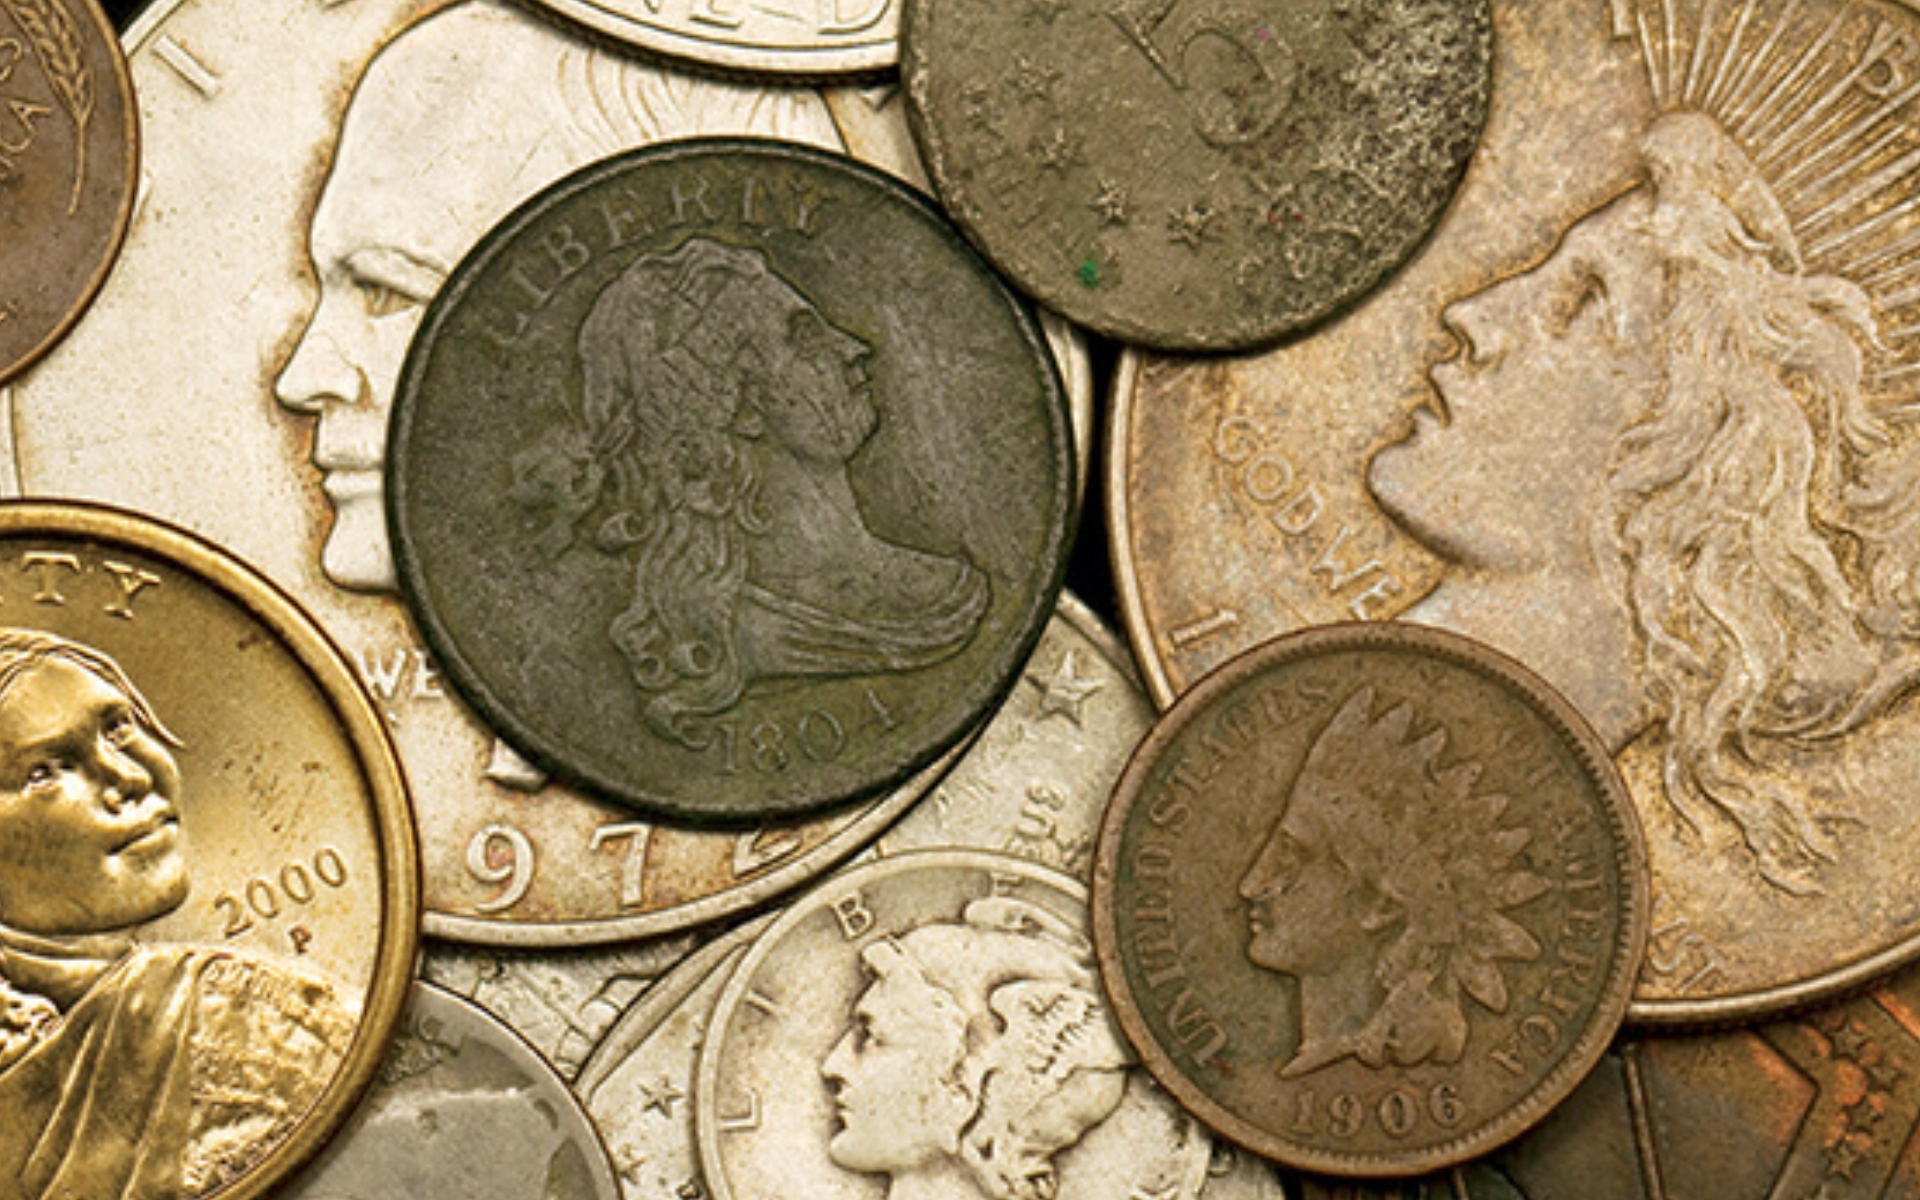 Pin on Coin collecting